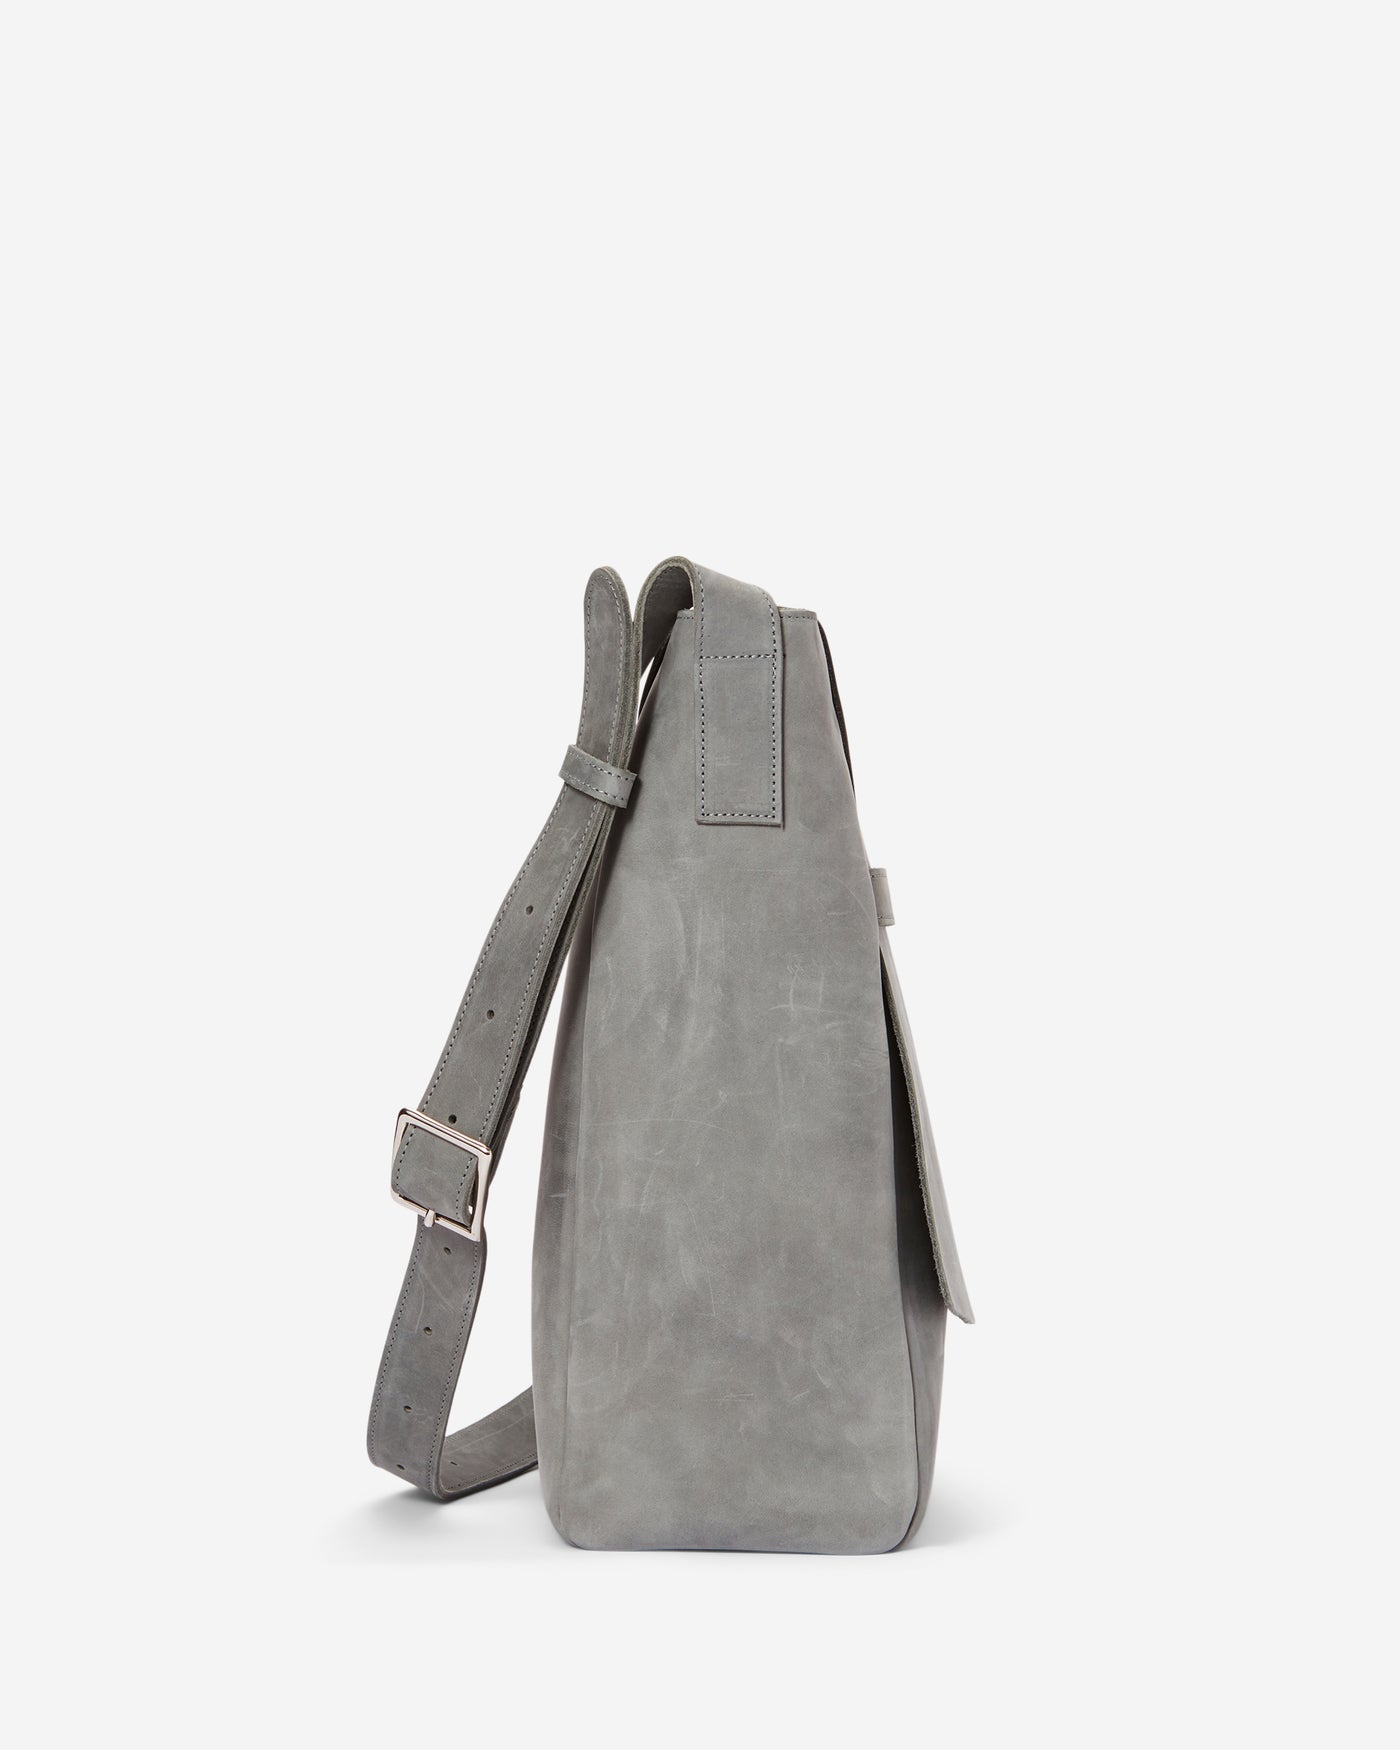 Michelle Bag - Grey  Joey James, The Label   